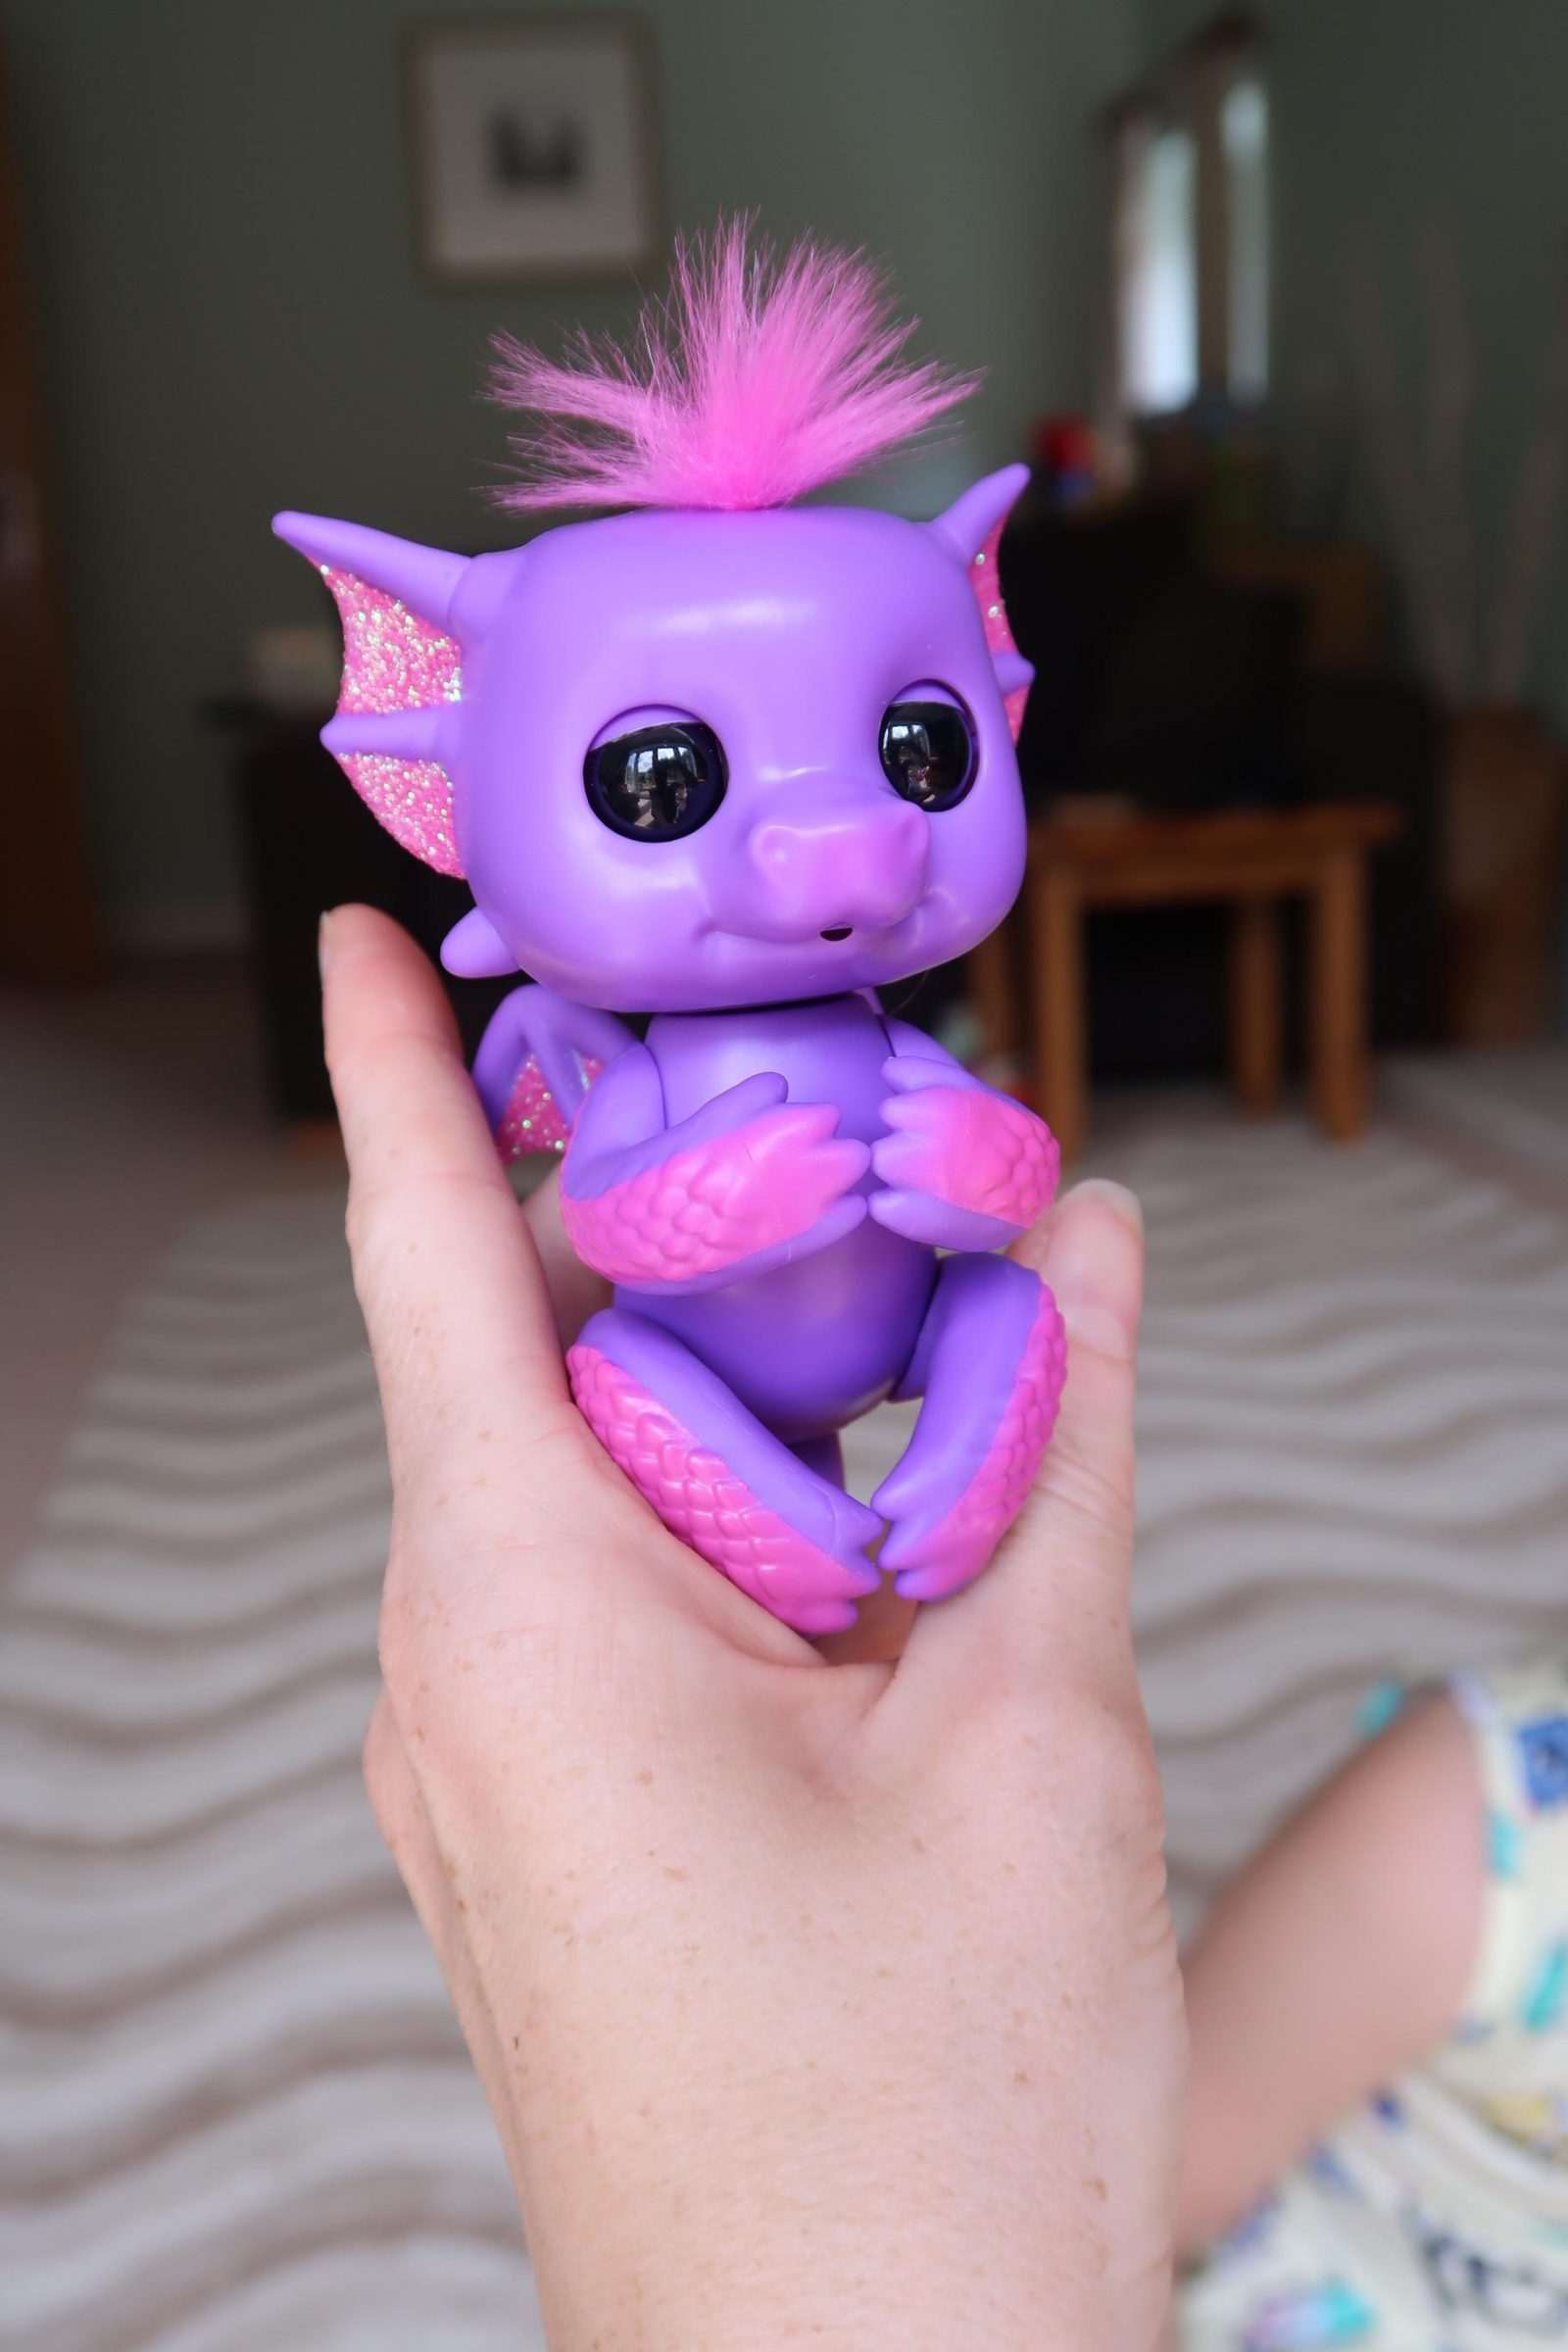 Baby Dragon Fingerlings – REVIEW